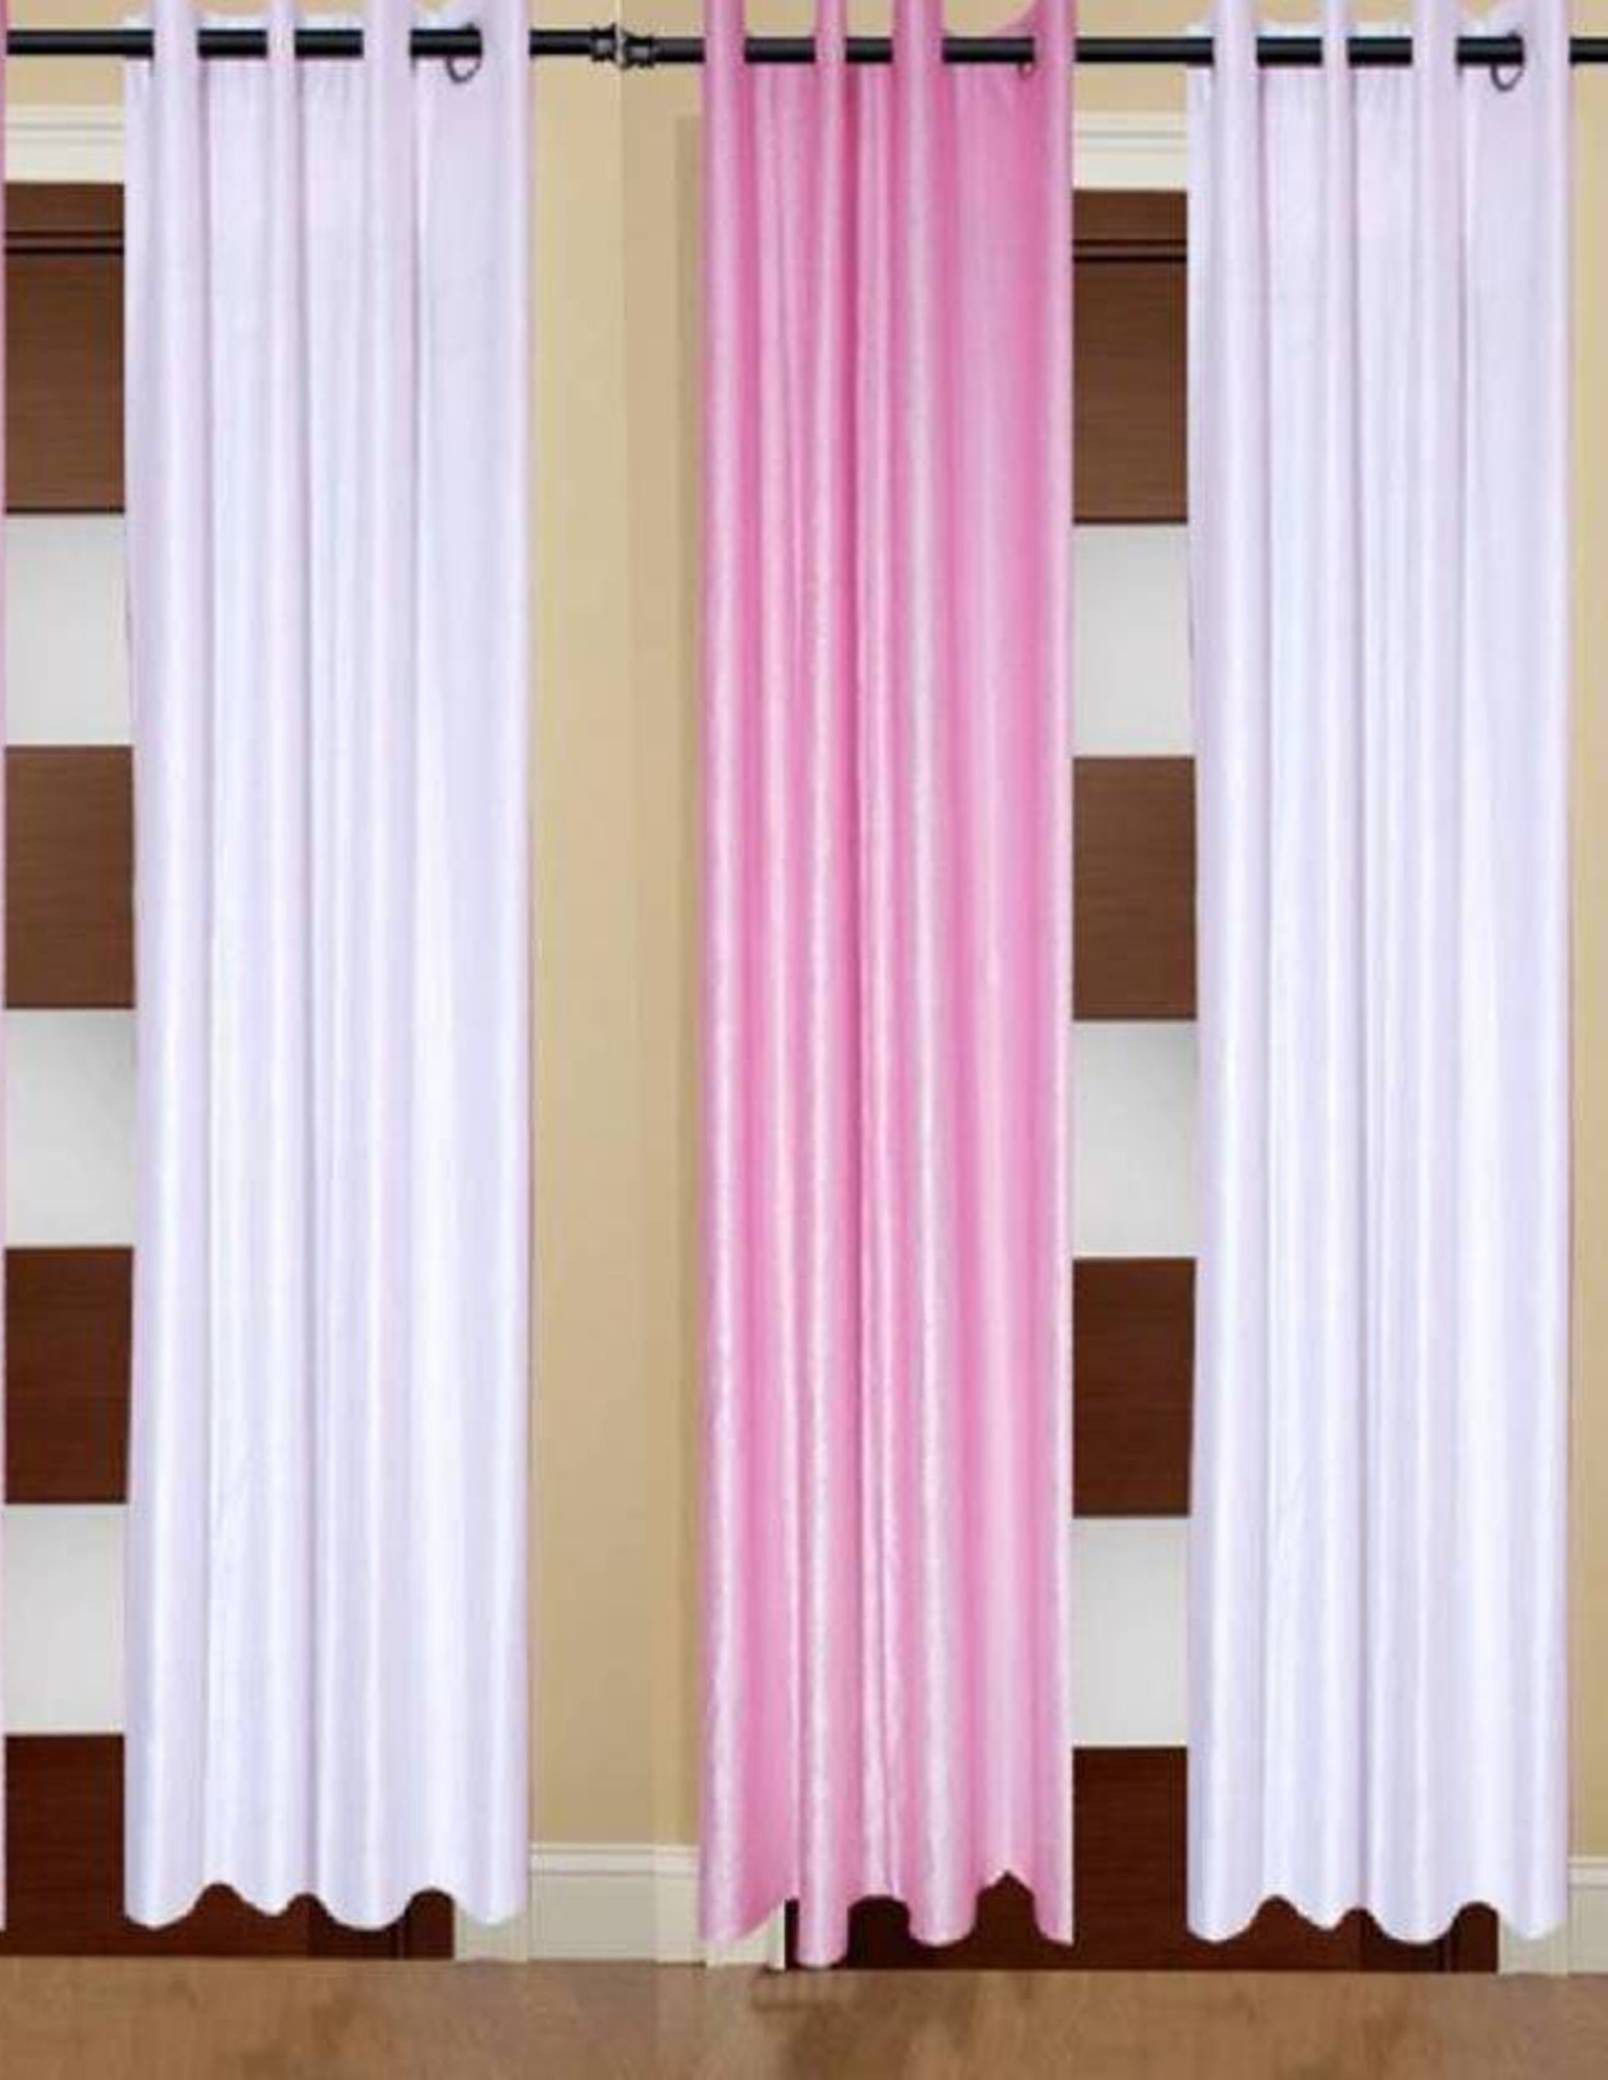     			HOMETALES Solid Semi-Transparent Eyelet Curtain 9 ft ( Pack of 3 ) - Multicolor